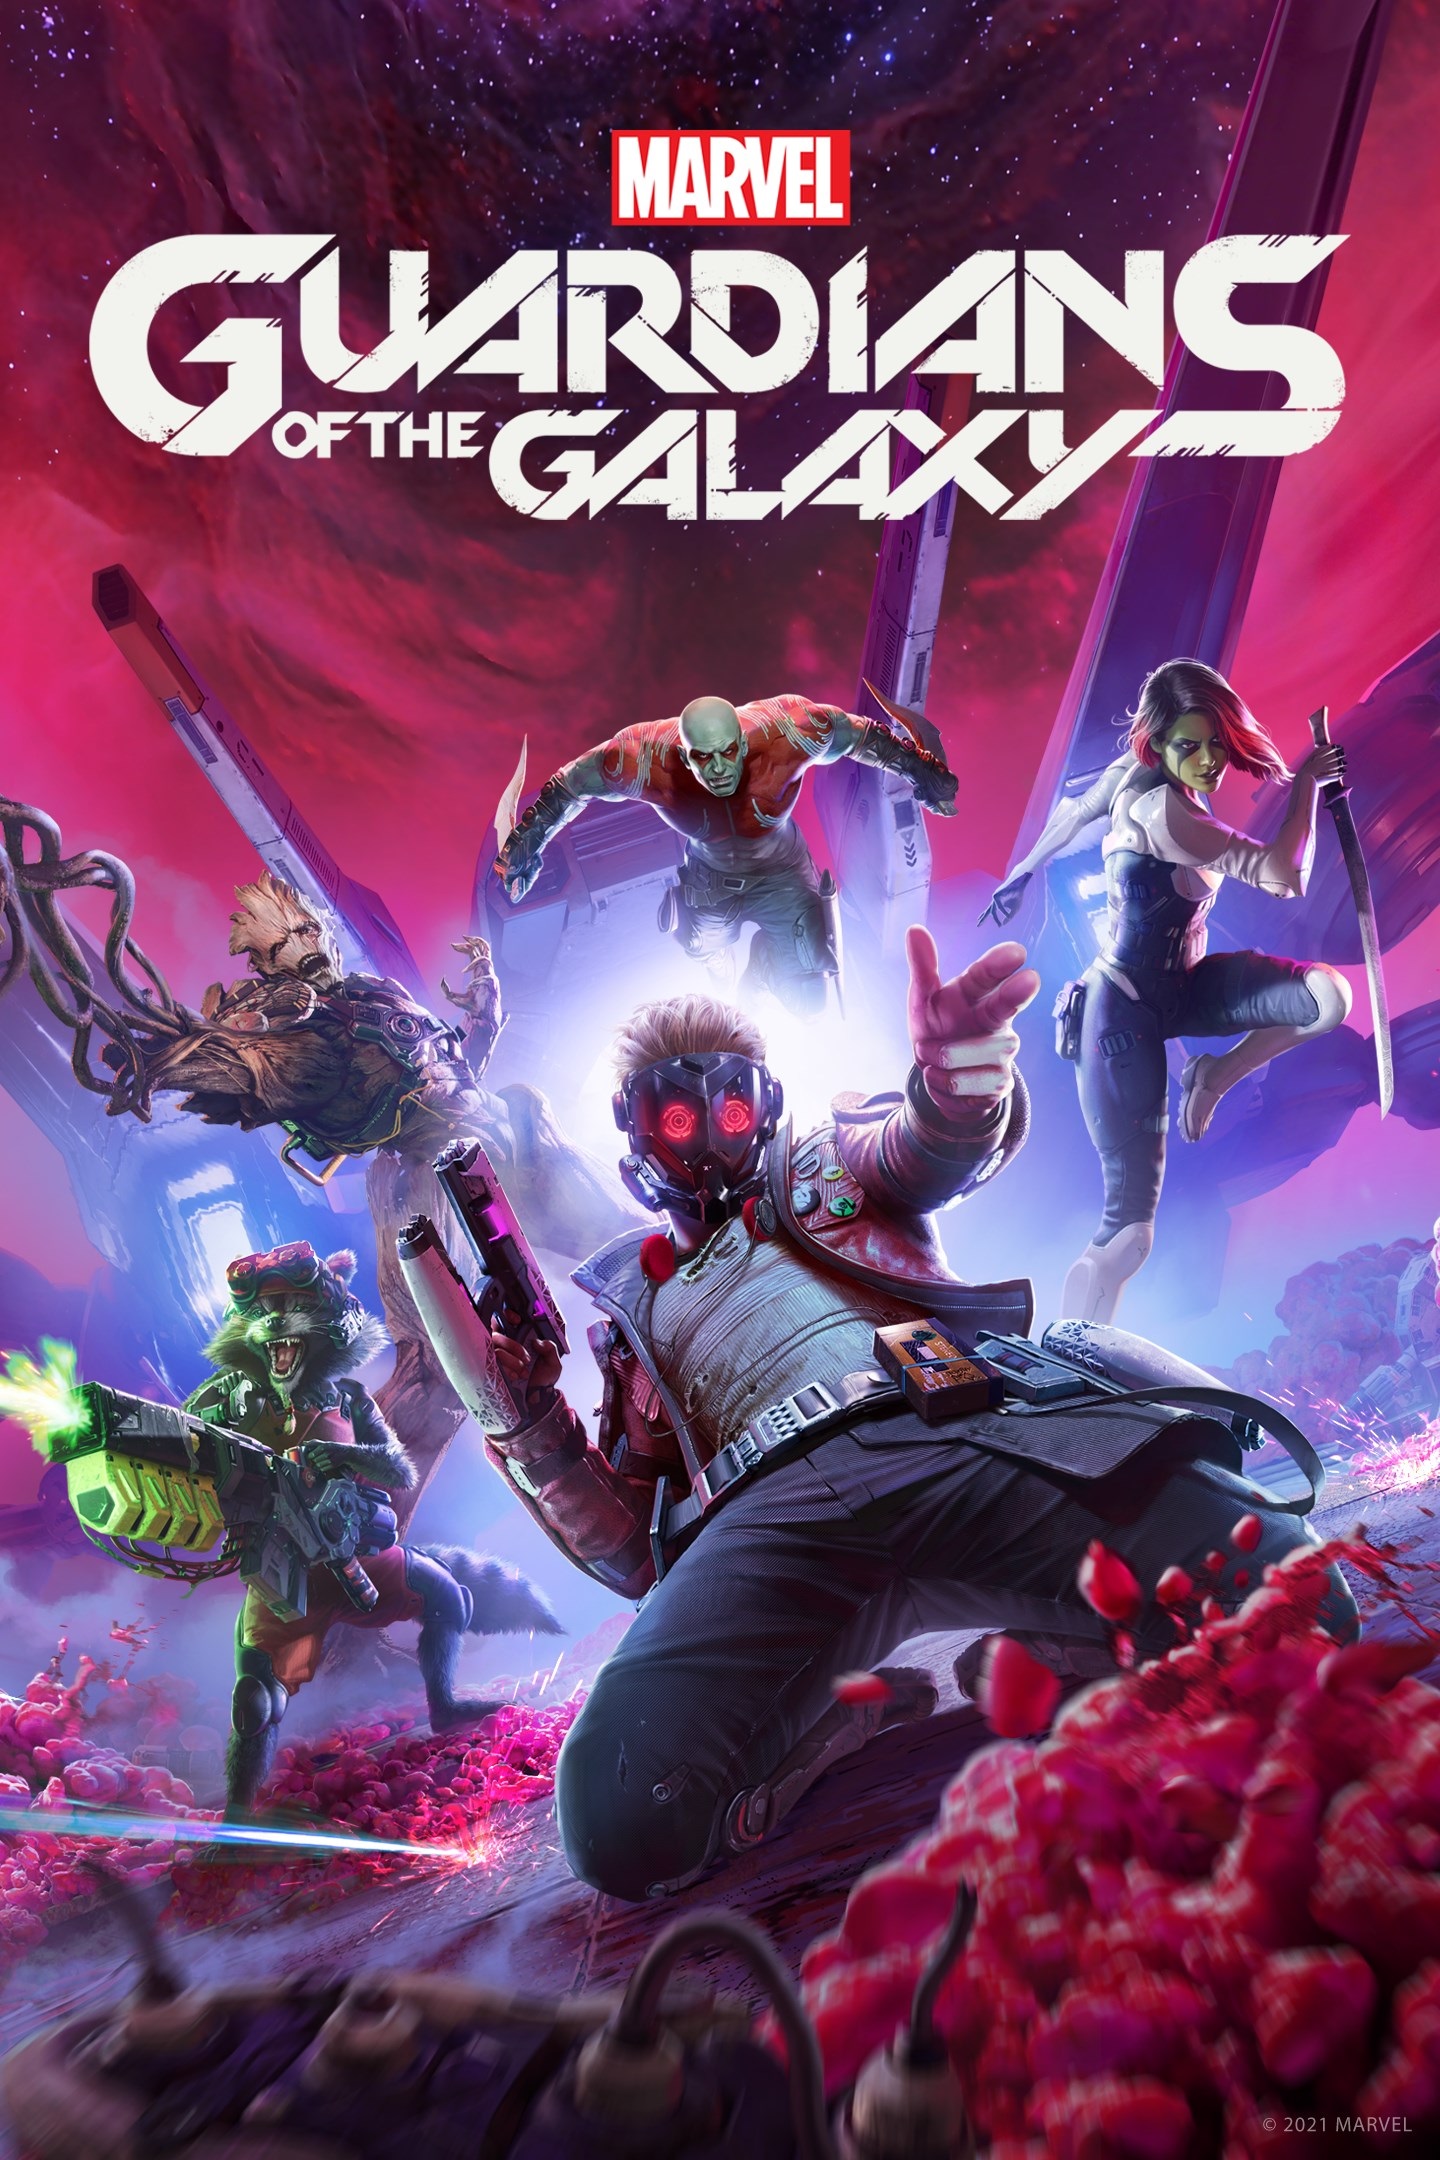 Marvel: Guardians of the Galaxy (2021), on Microsoft Xbox